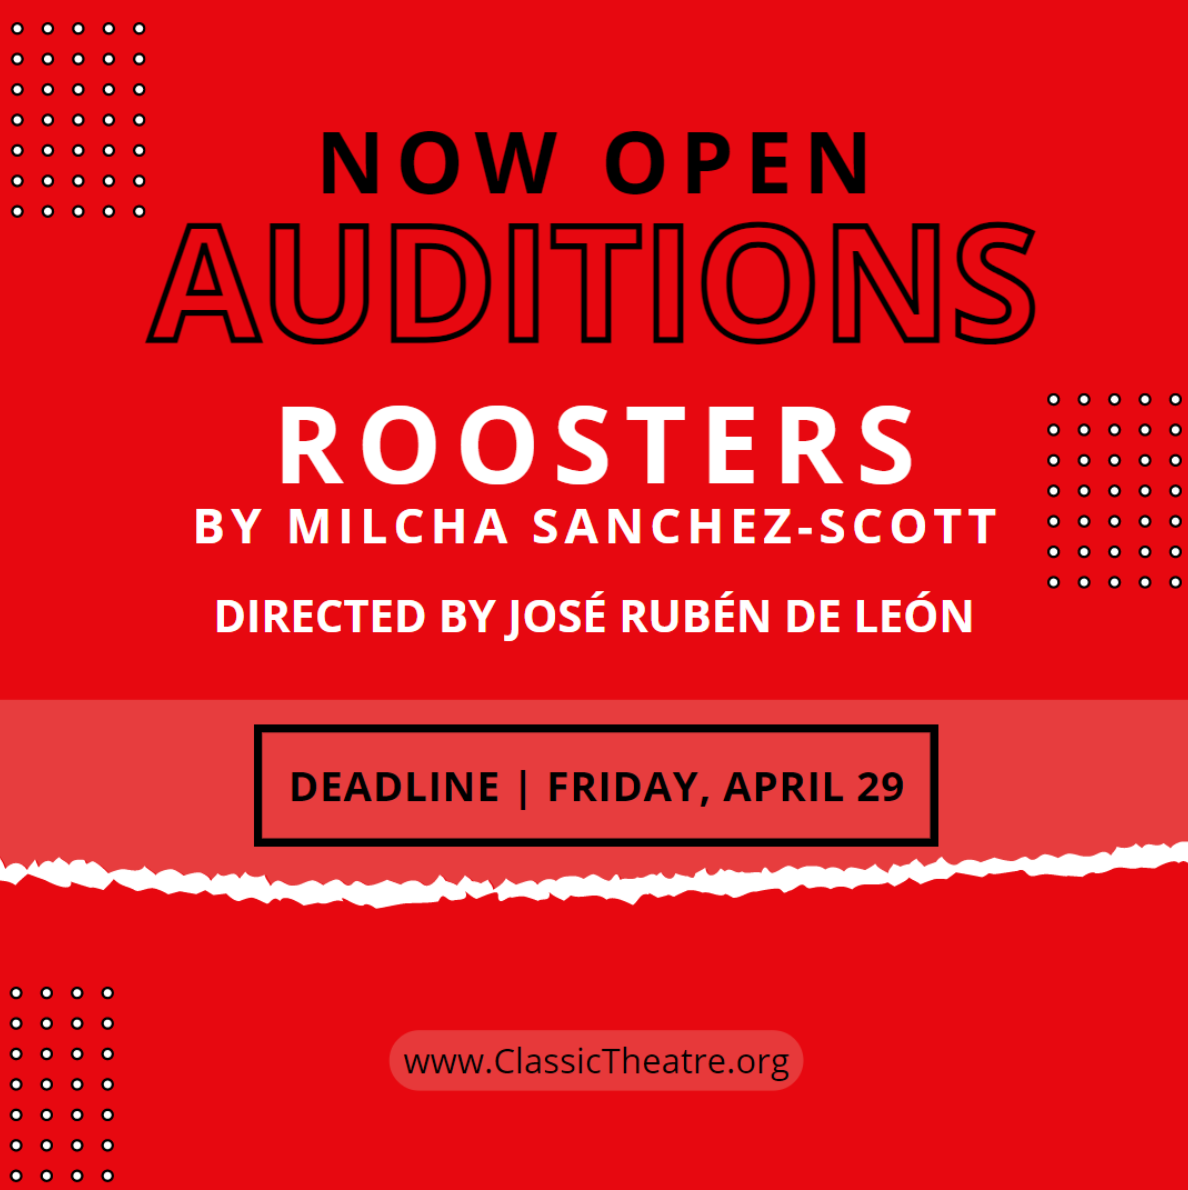 Video Auditions fo ROOSTERS, by Classic Theatre of San Antonio, Deadline of April 29, 2022